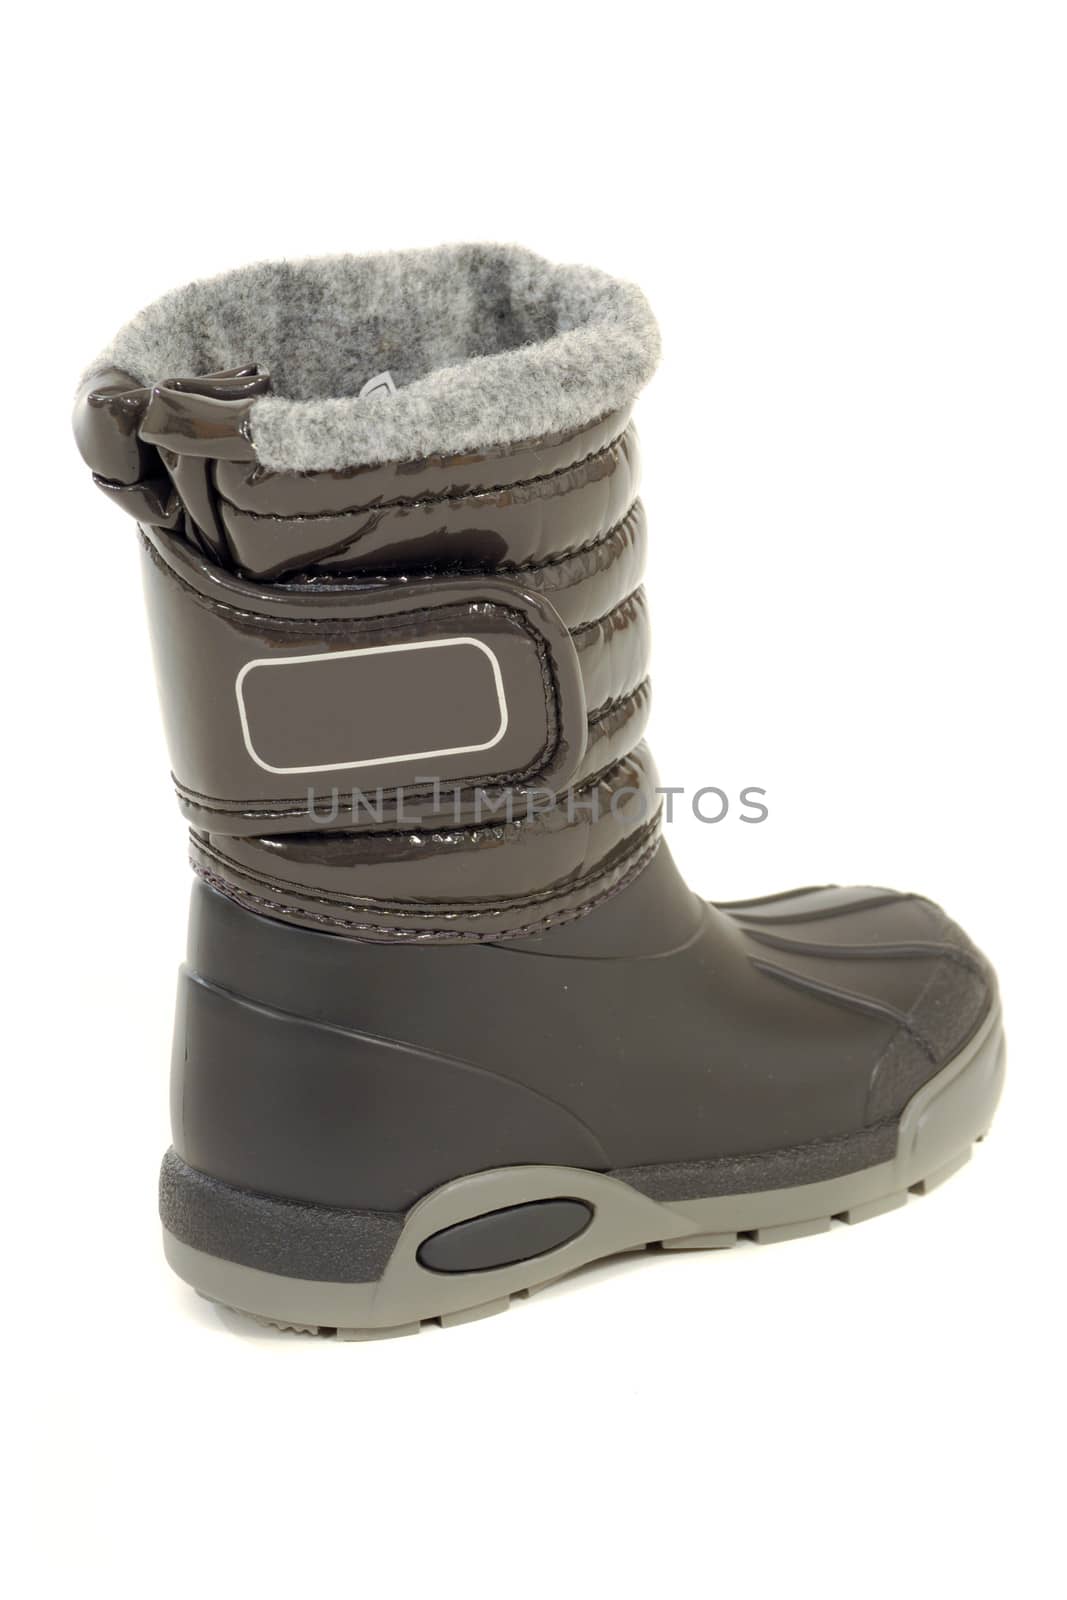 A winter boot taken on a white background.